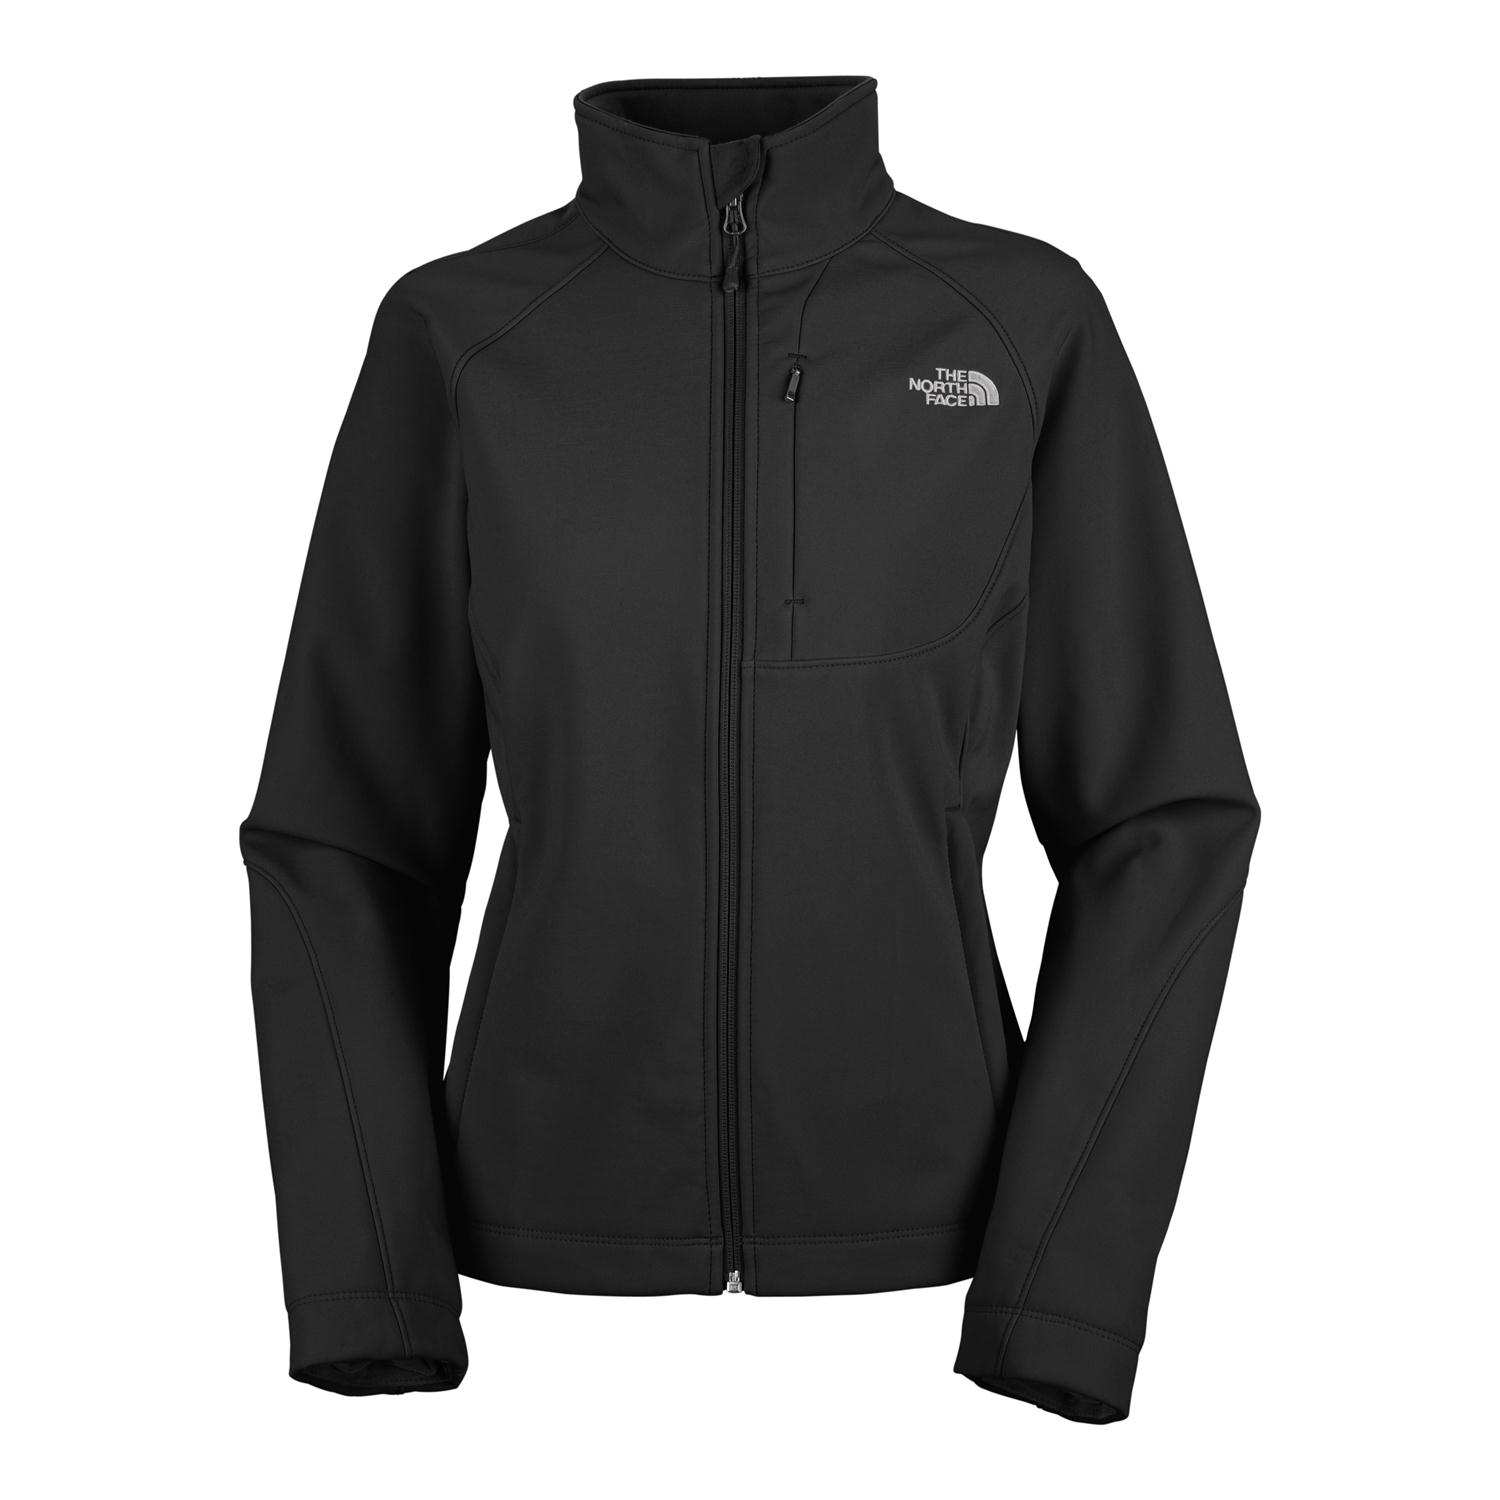 The North Face Apex Bionic Jacket - Women's | evo outlet